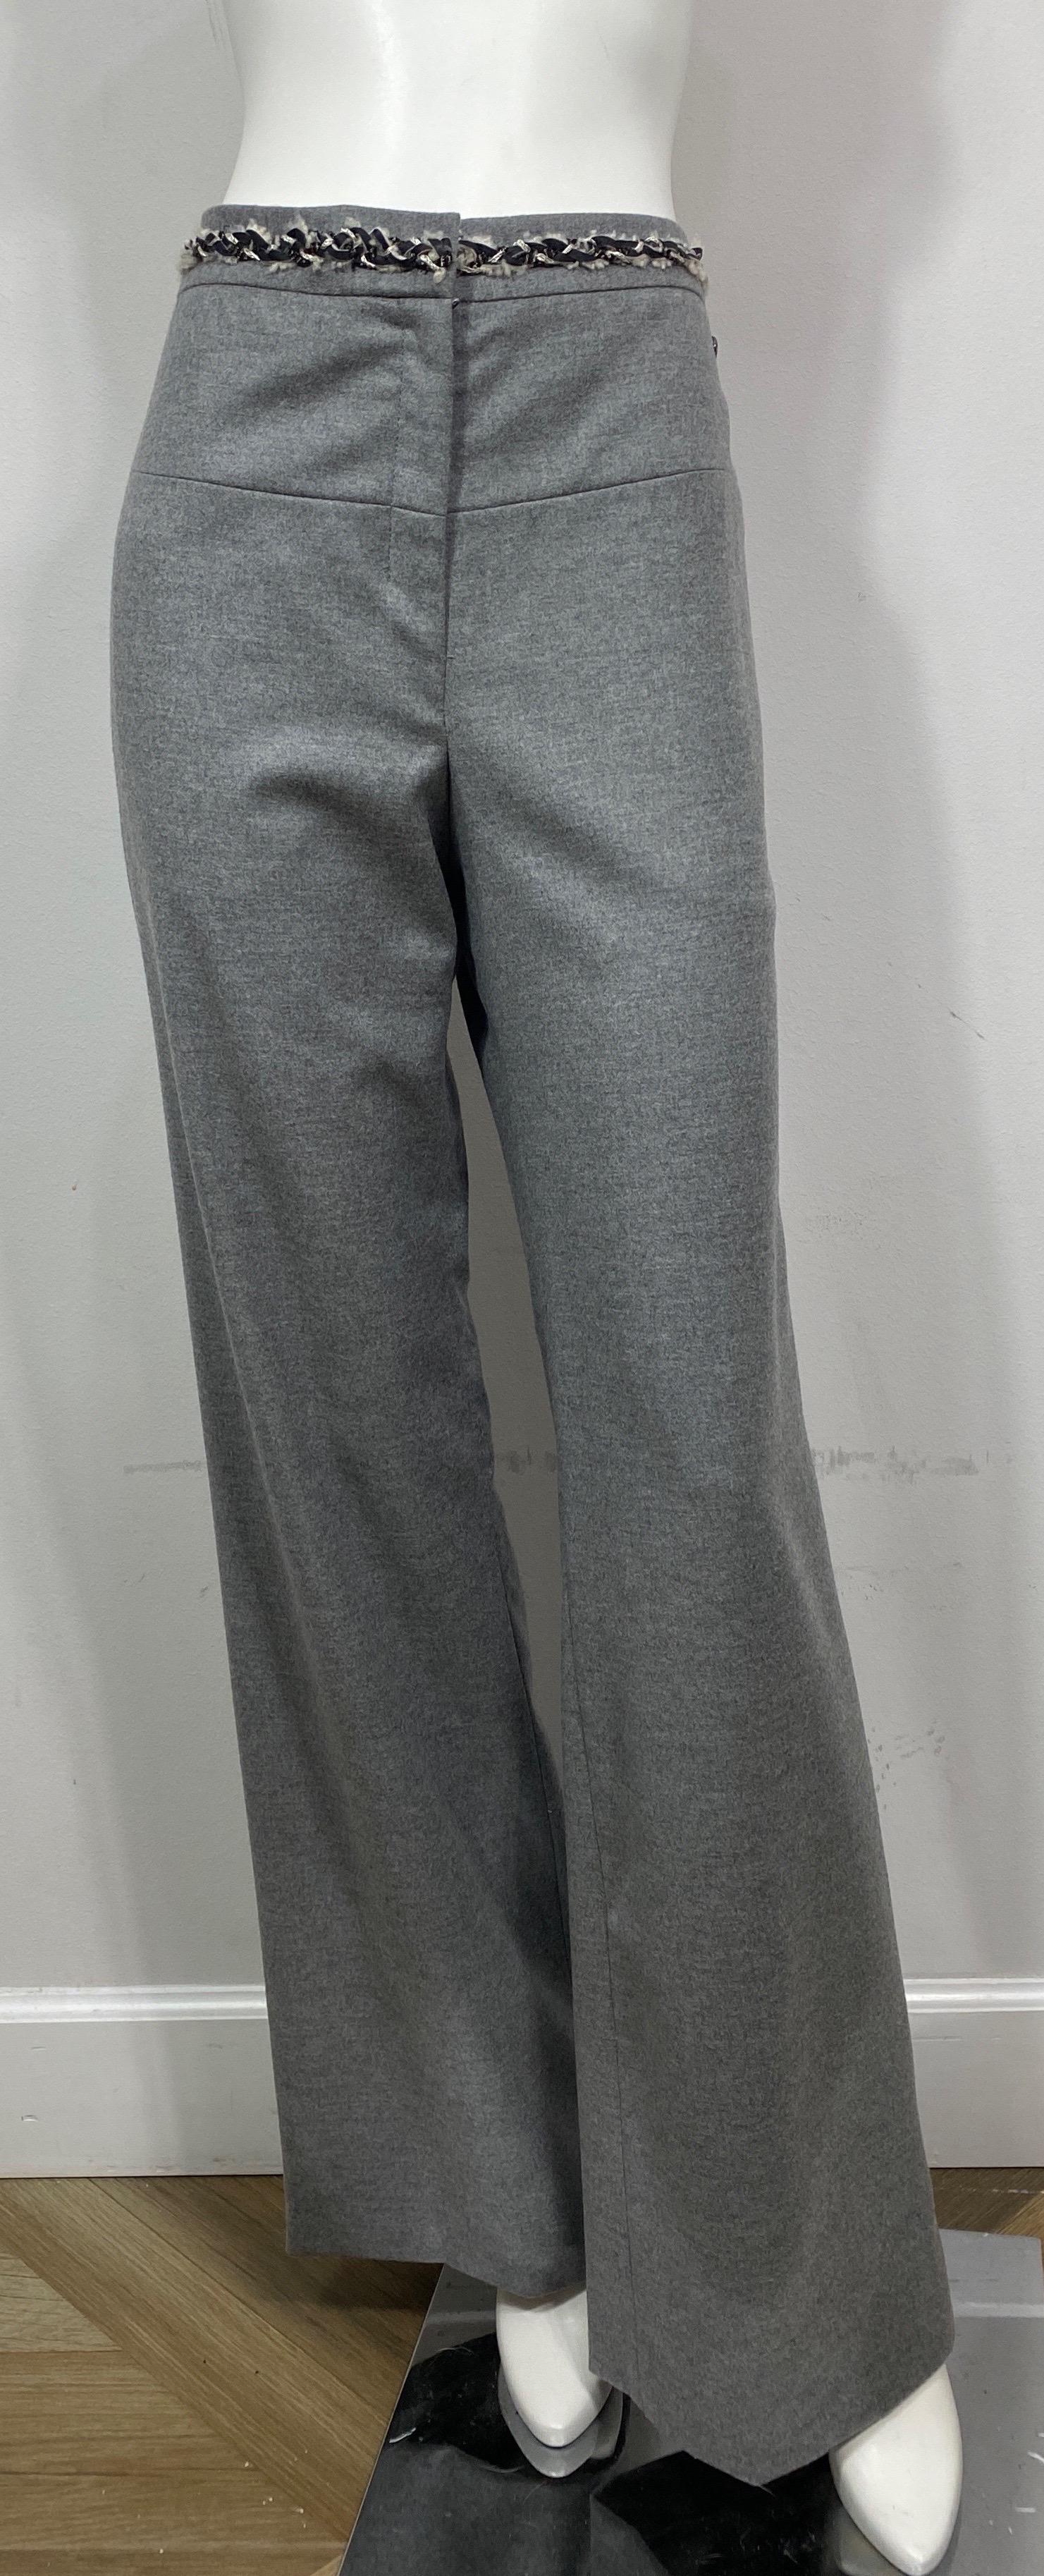 Chanel Grey Wool Wide Leg Pants-Size 42  The grey wool blend pants have a 6” front zipper with a hidden large hook and eye and button closure, a gunmetal textured oval cc ornament on the top front left hip area, and a woven black leather/white